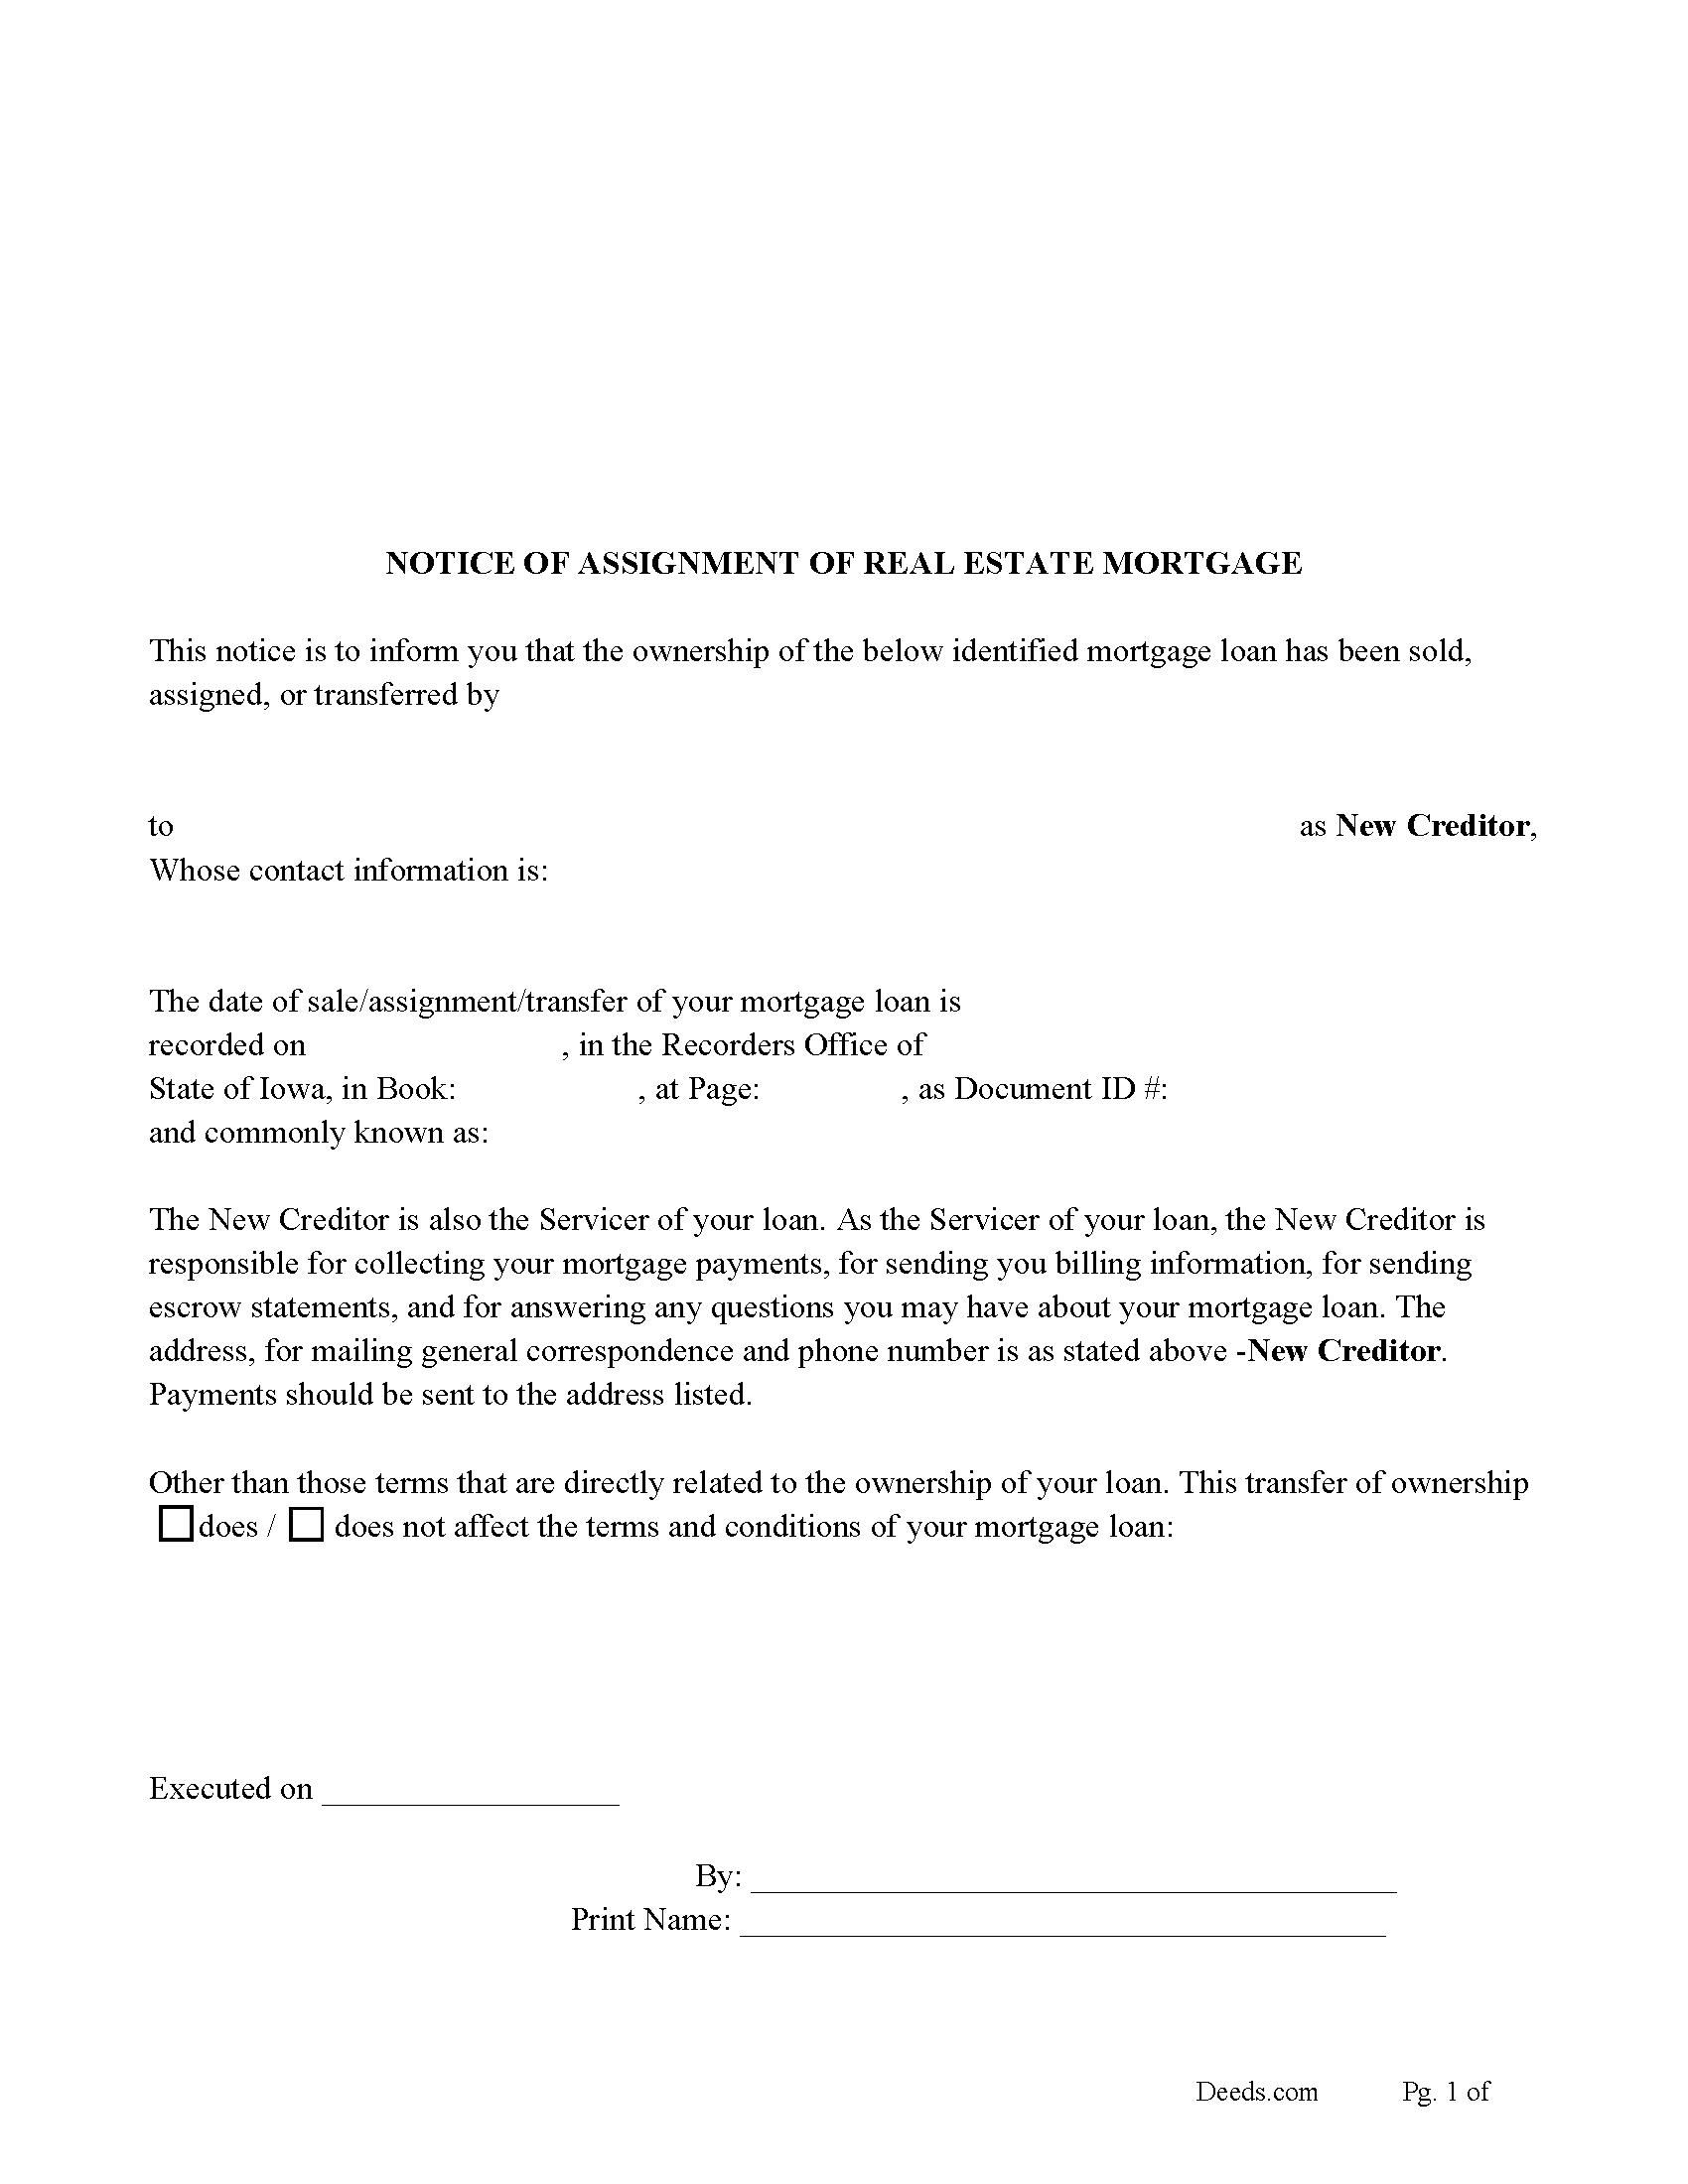 Notice of Assignment of Real Estate Mortgage Form